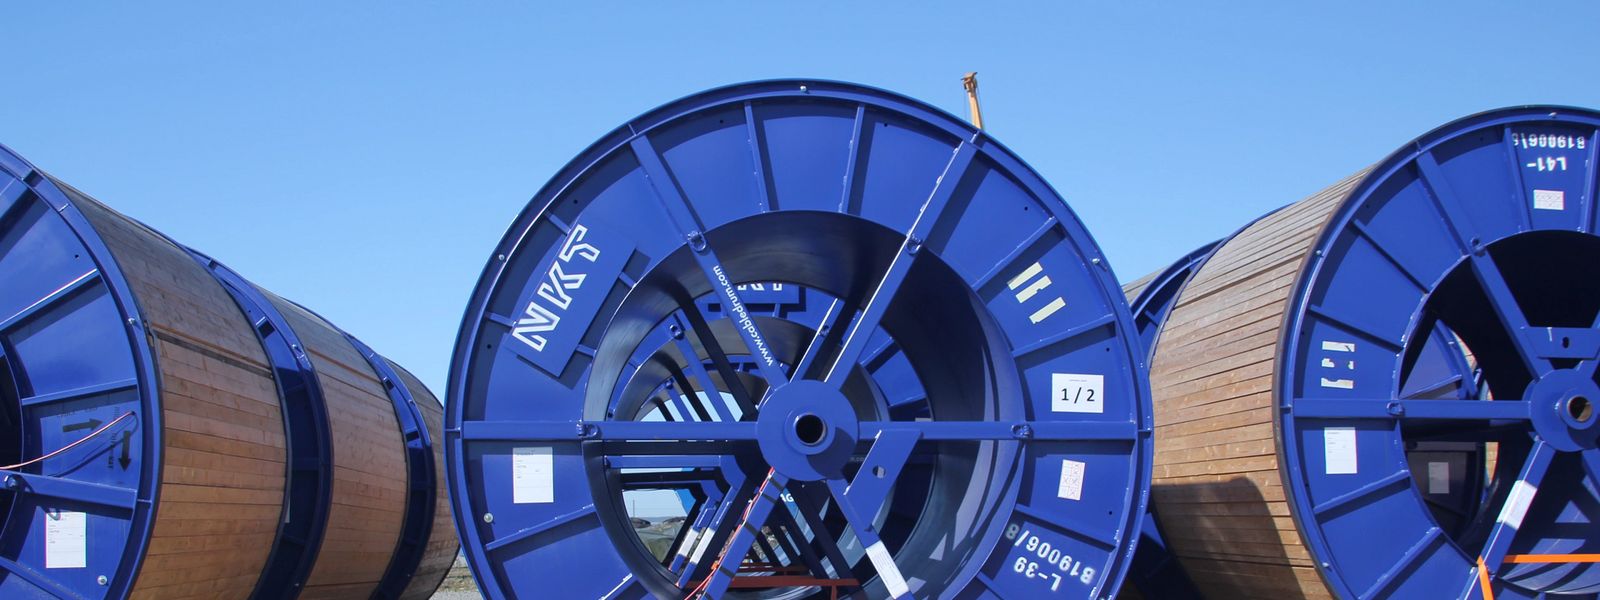 Cable drums under blue sky